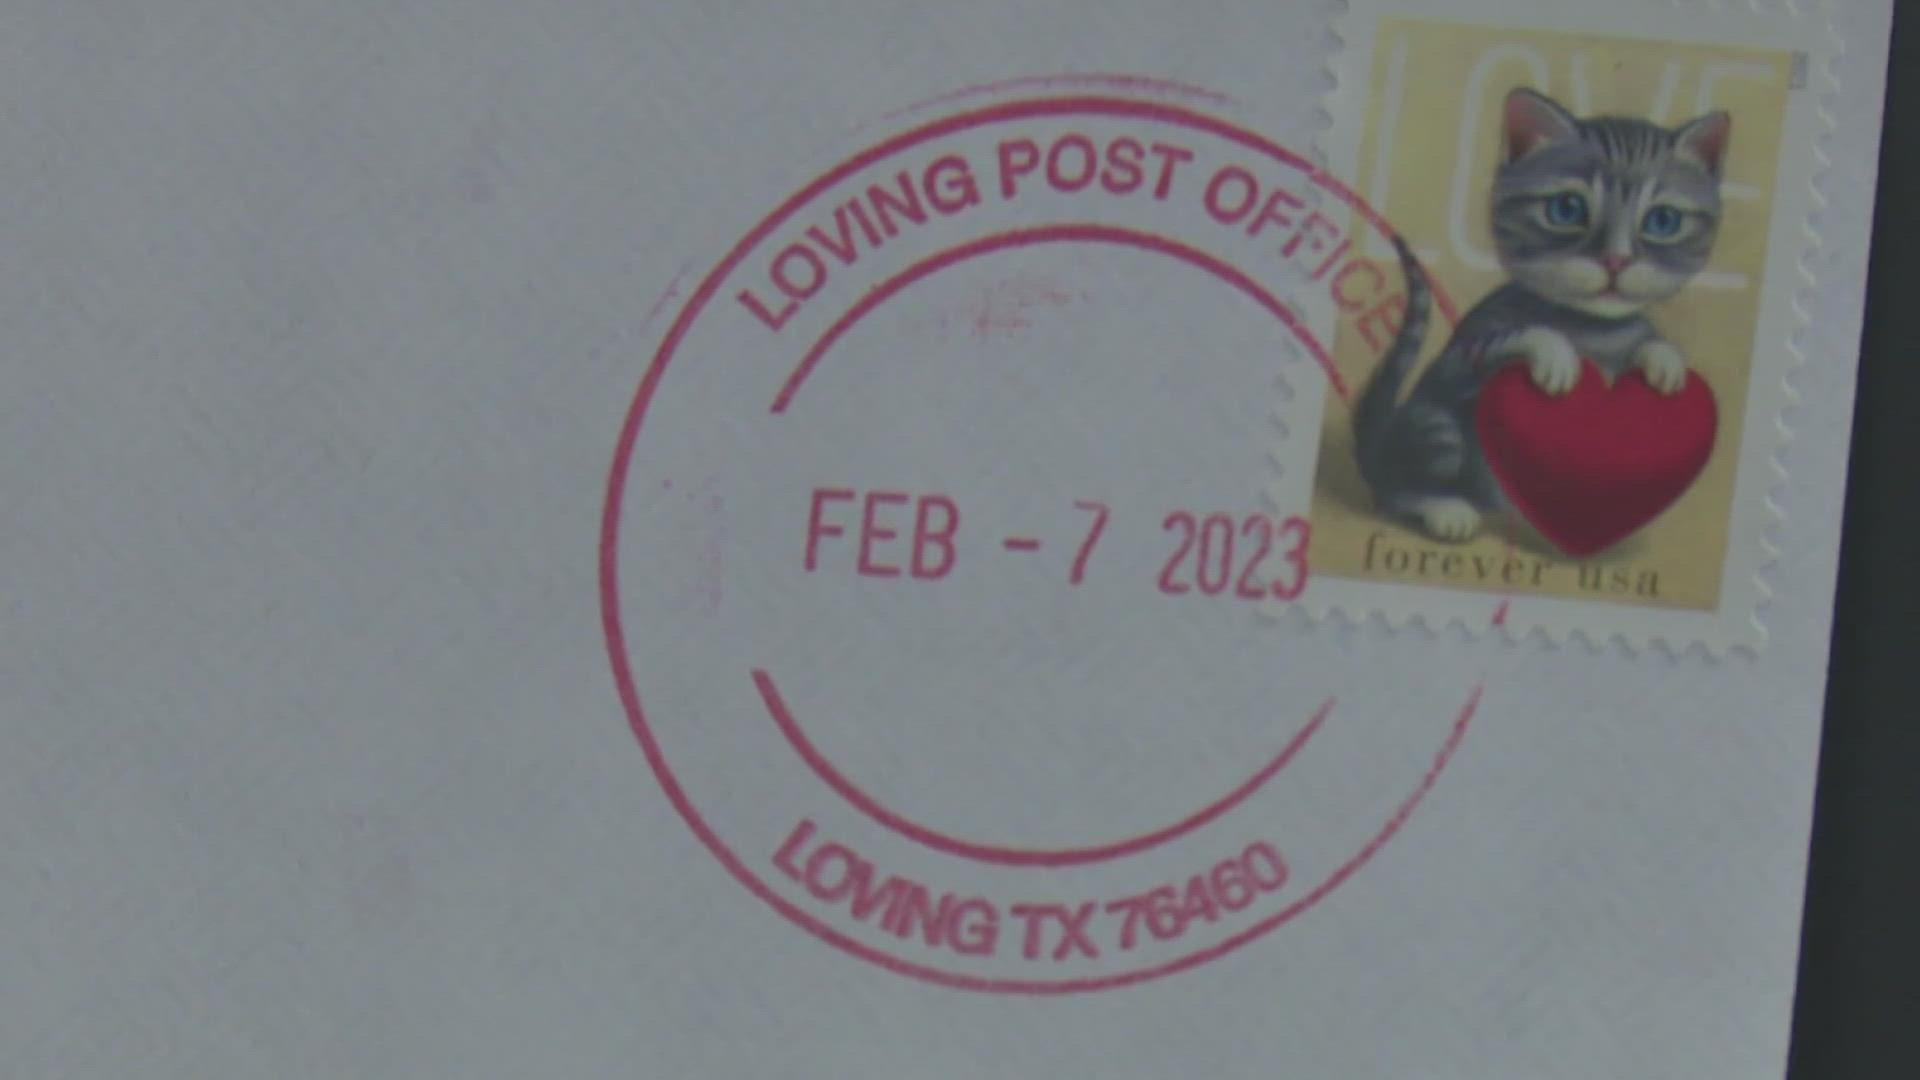 People address and add postage to their valentines, then put them in a larger envelope addressed to the Loving Post Office.